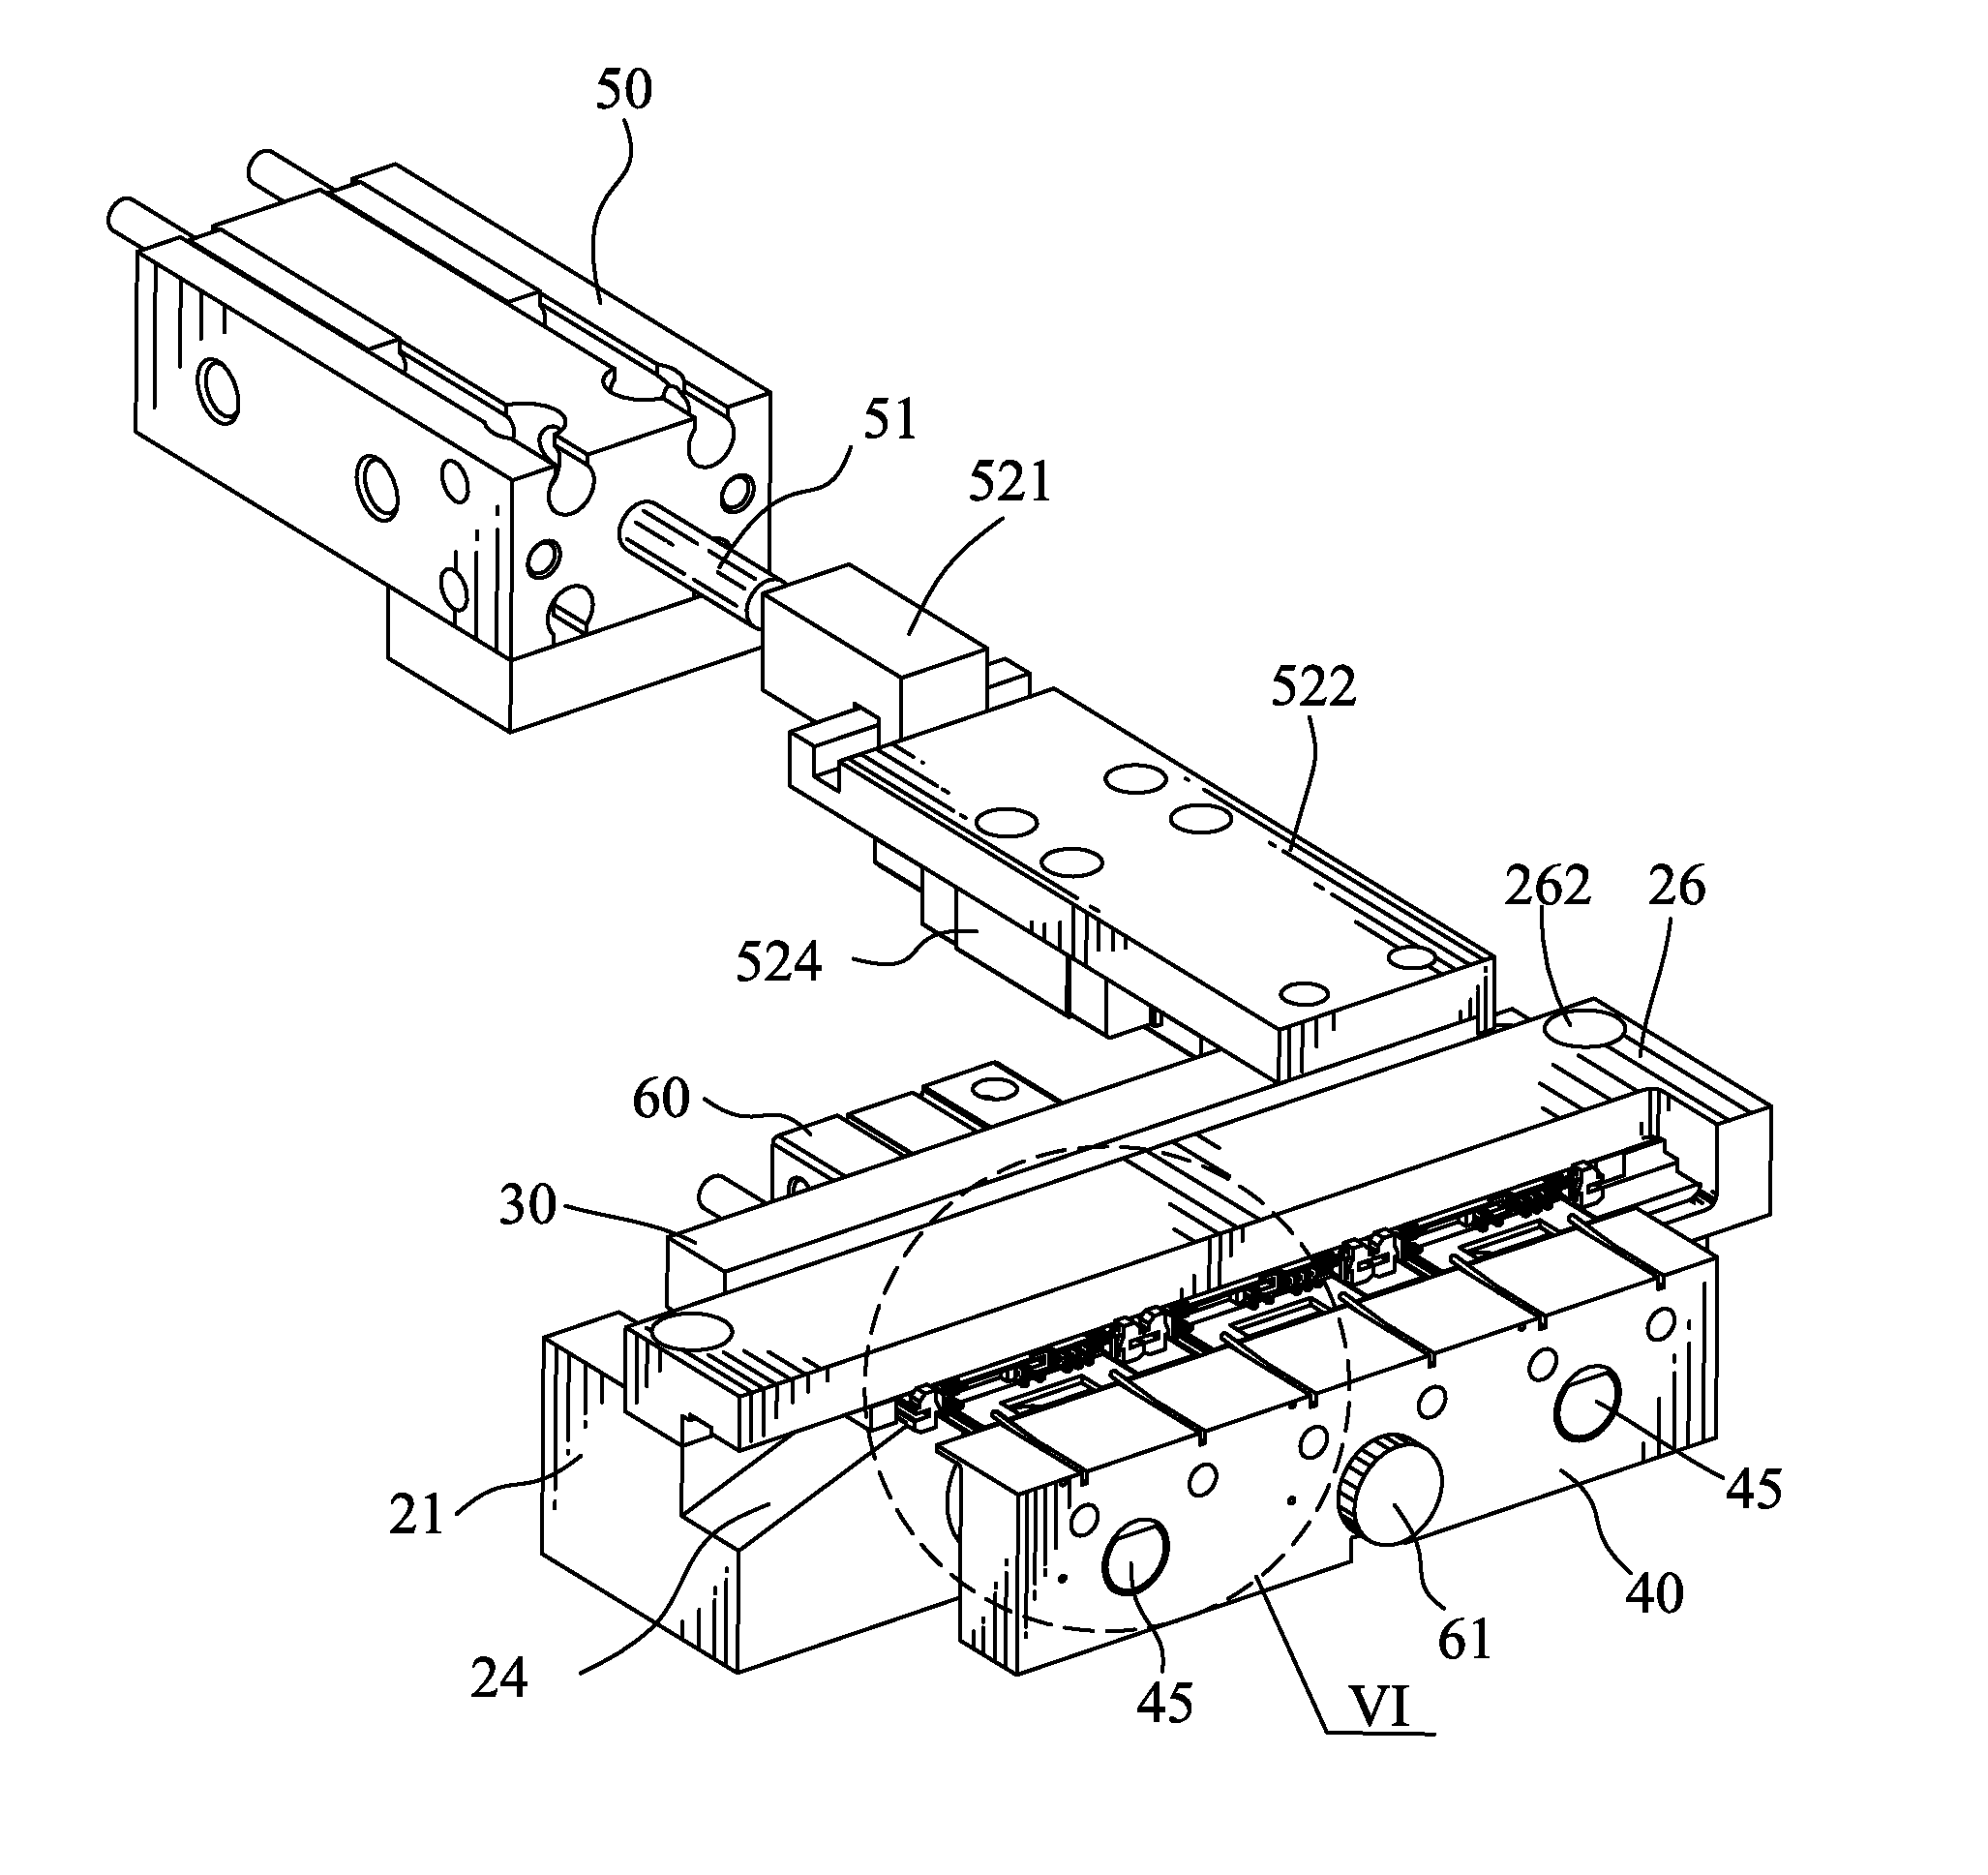 Holding mechanism for electrical connectors and pcbs